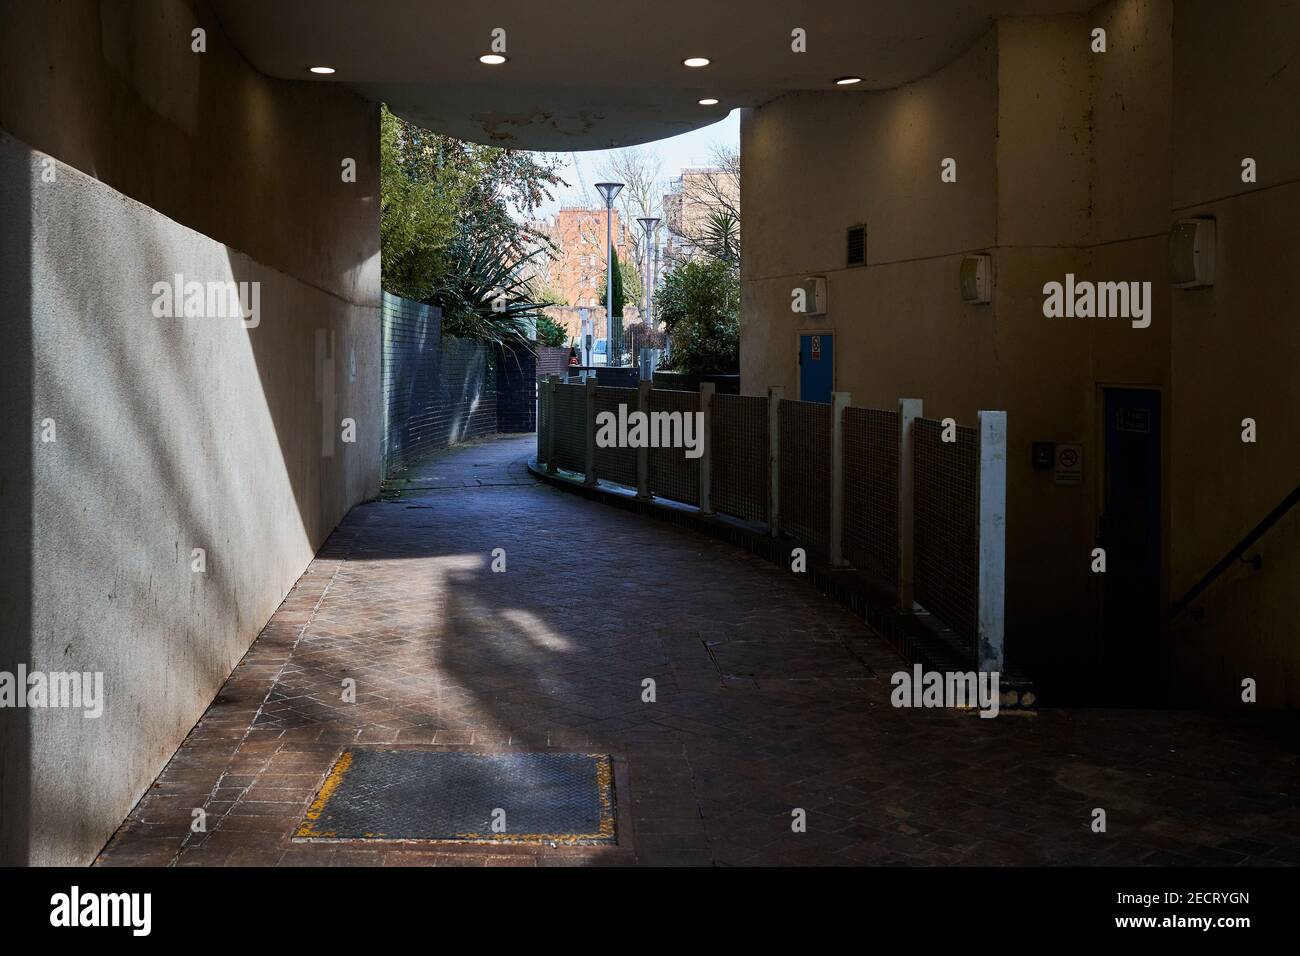 London,UK - 13 Feb 2021 : Walkway though covered walkway through built up estate through to green area Stock Photo